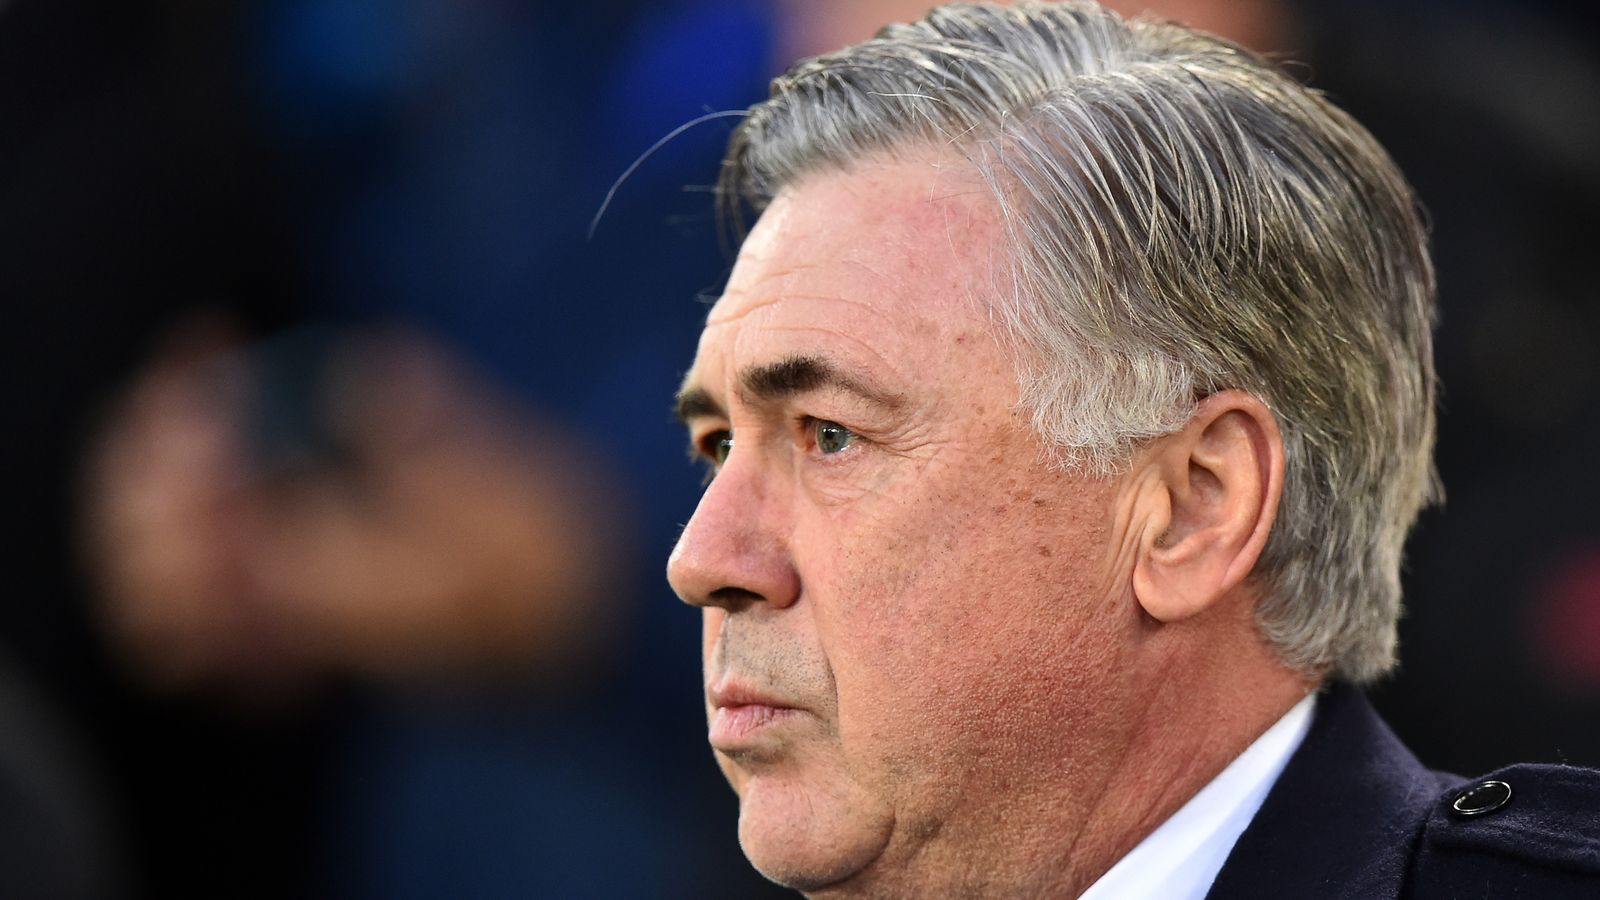 Carlo Ancelotti’s Everton challenge is different but he has support ...